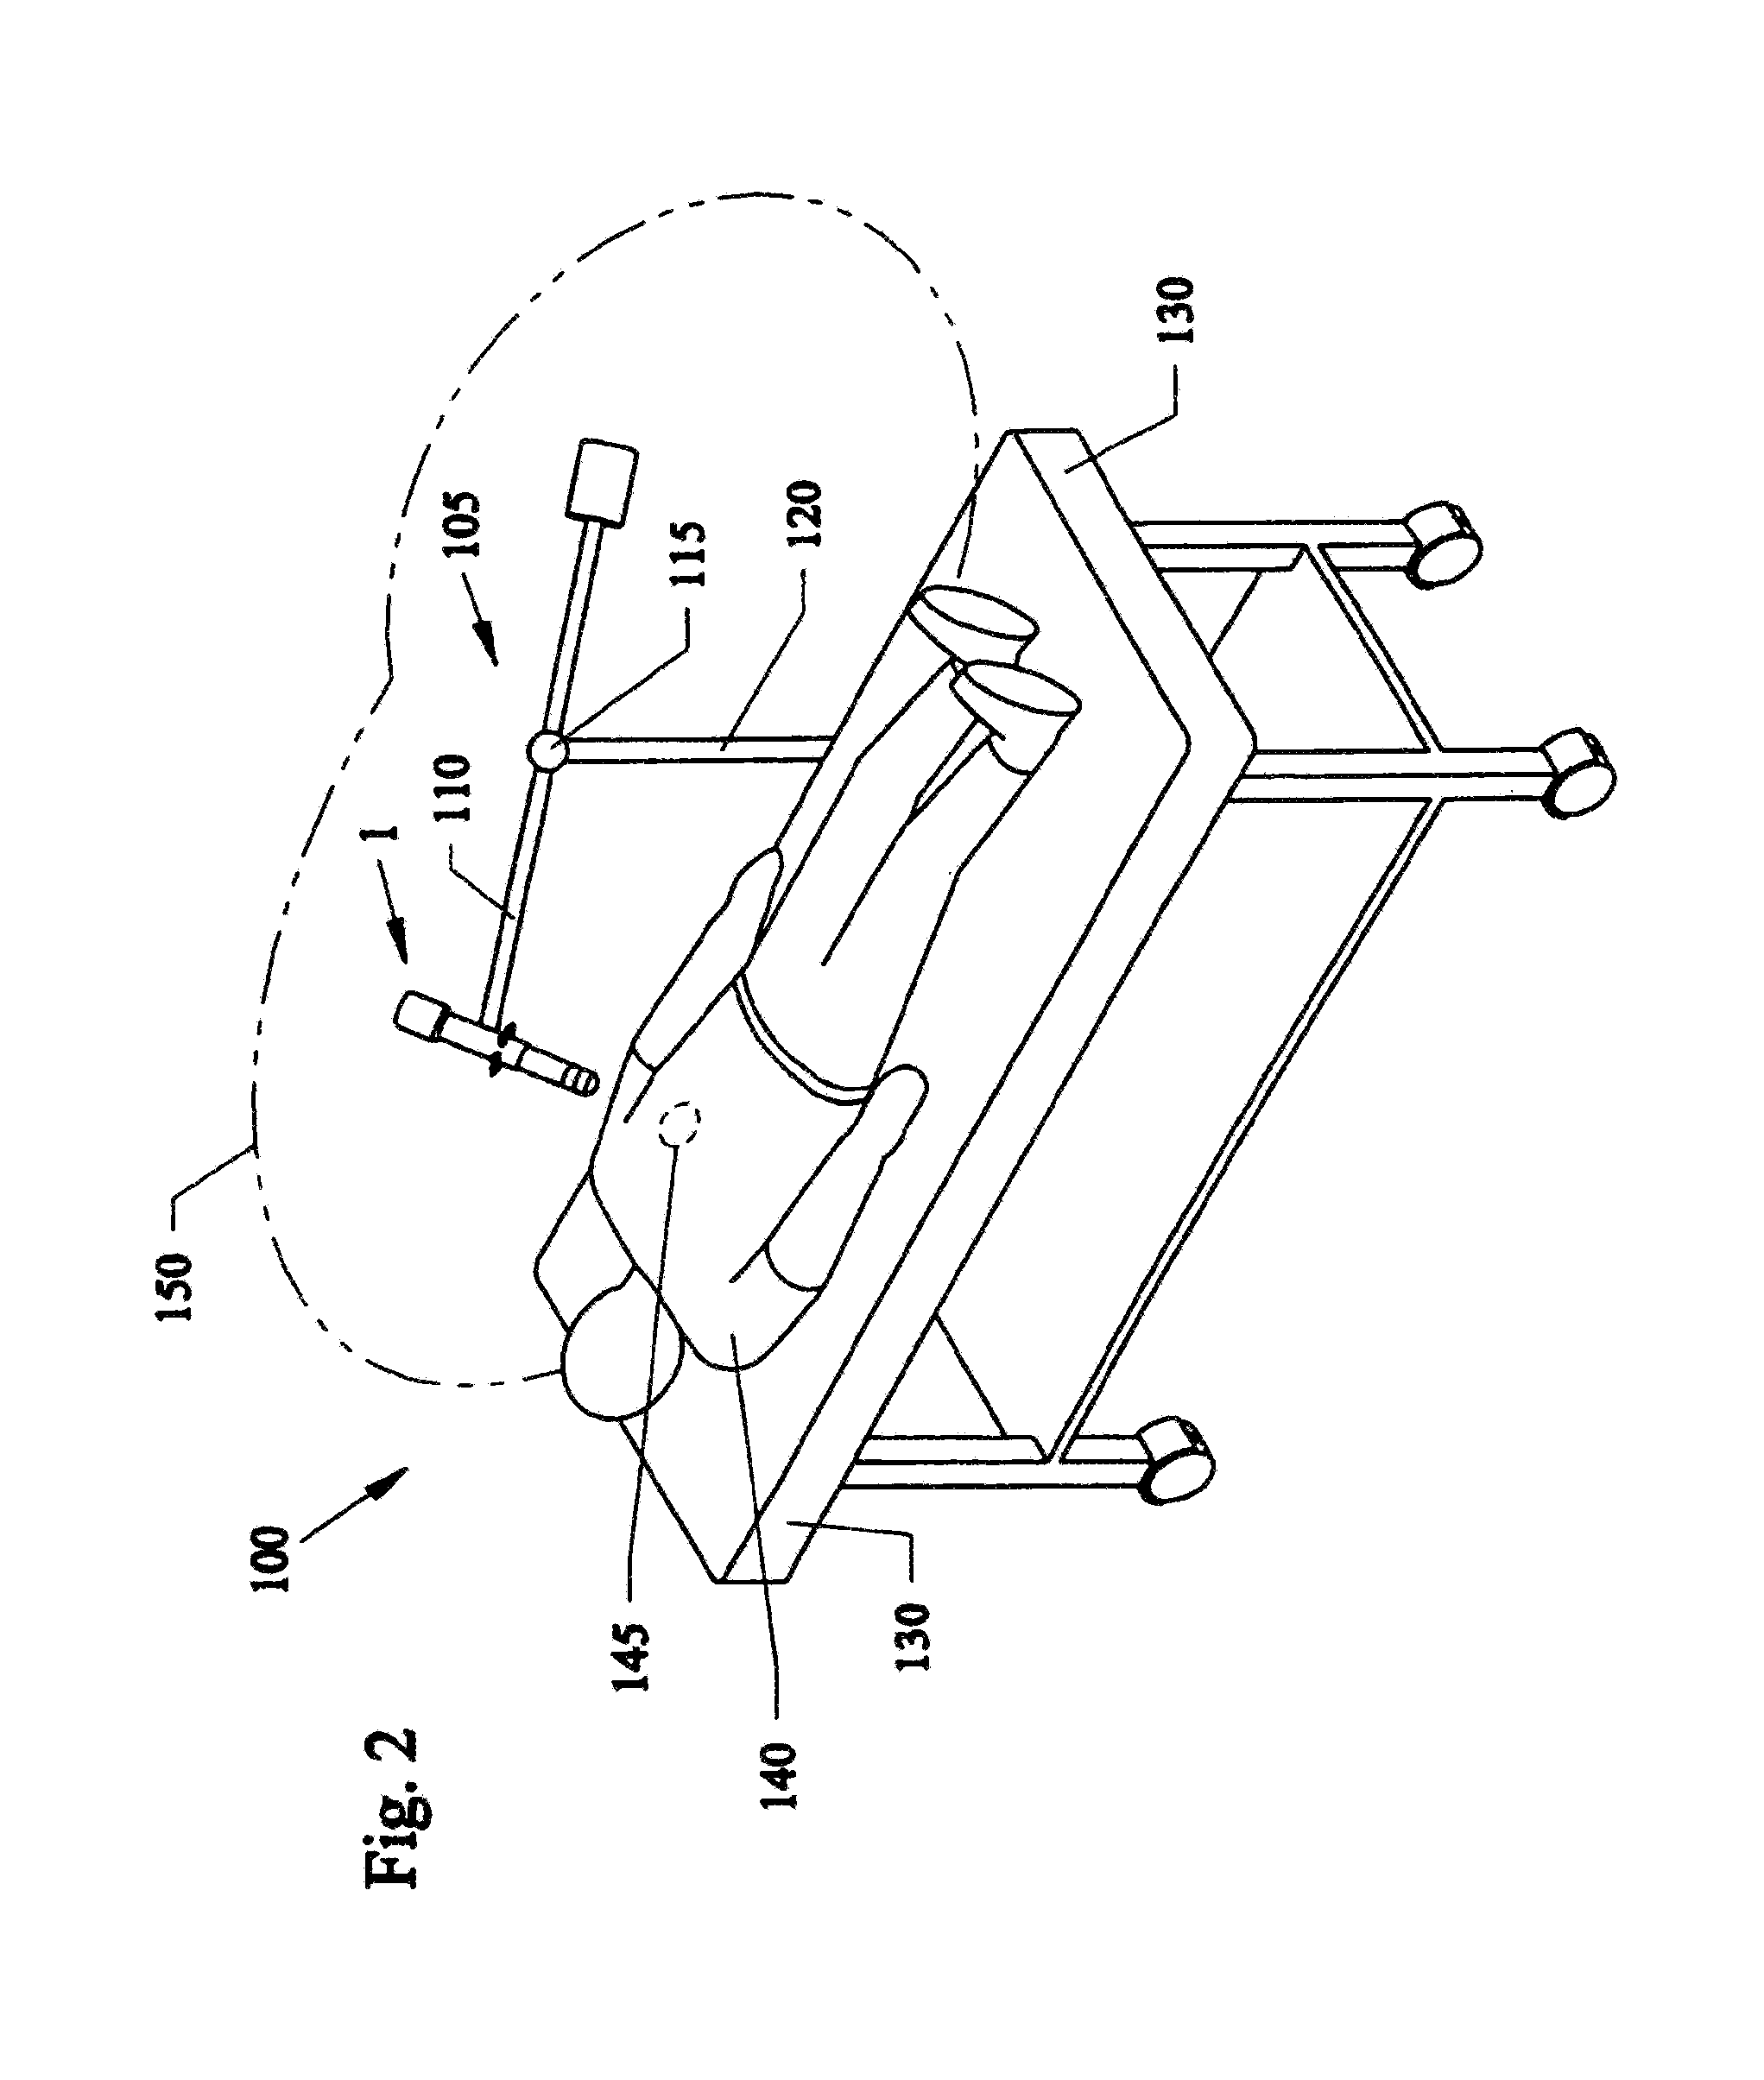 Therapy tools and treatment methods